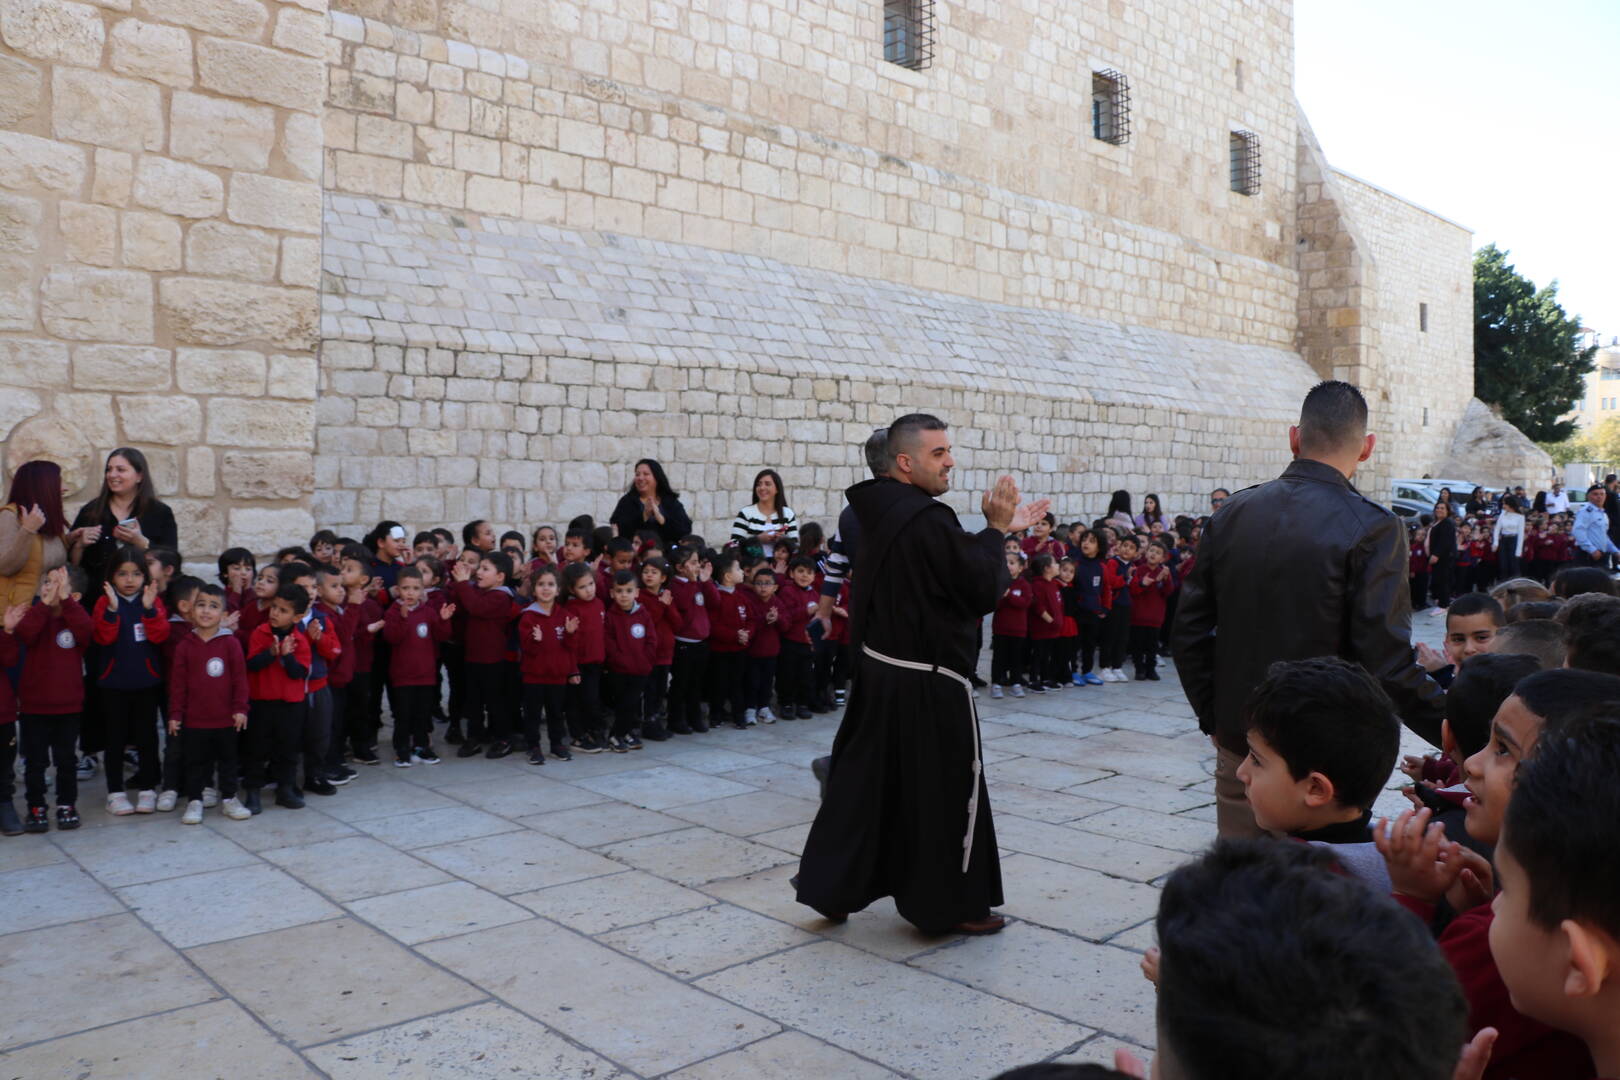 Children wait for the annual Procession of the Custos of the Holy Land, as well as Franciscan friars, into the Church of the Nativity to mark the beginning of Advent (Photo by author)